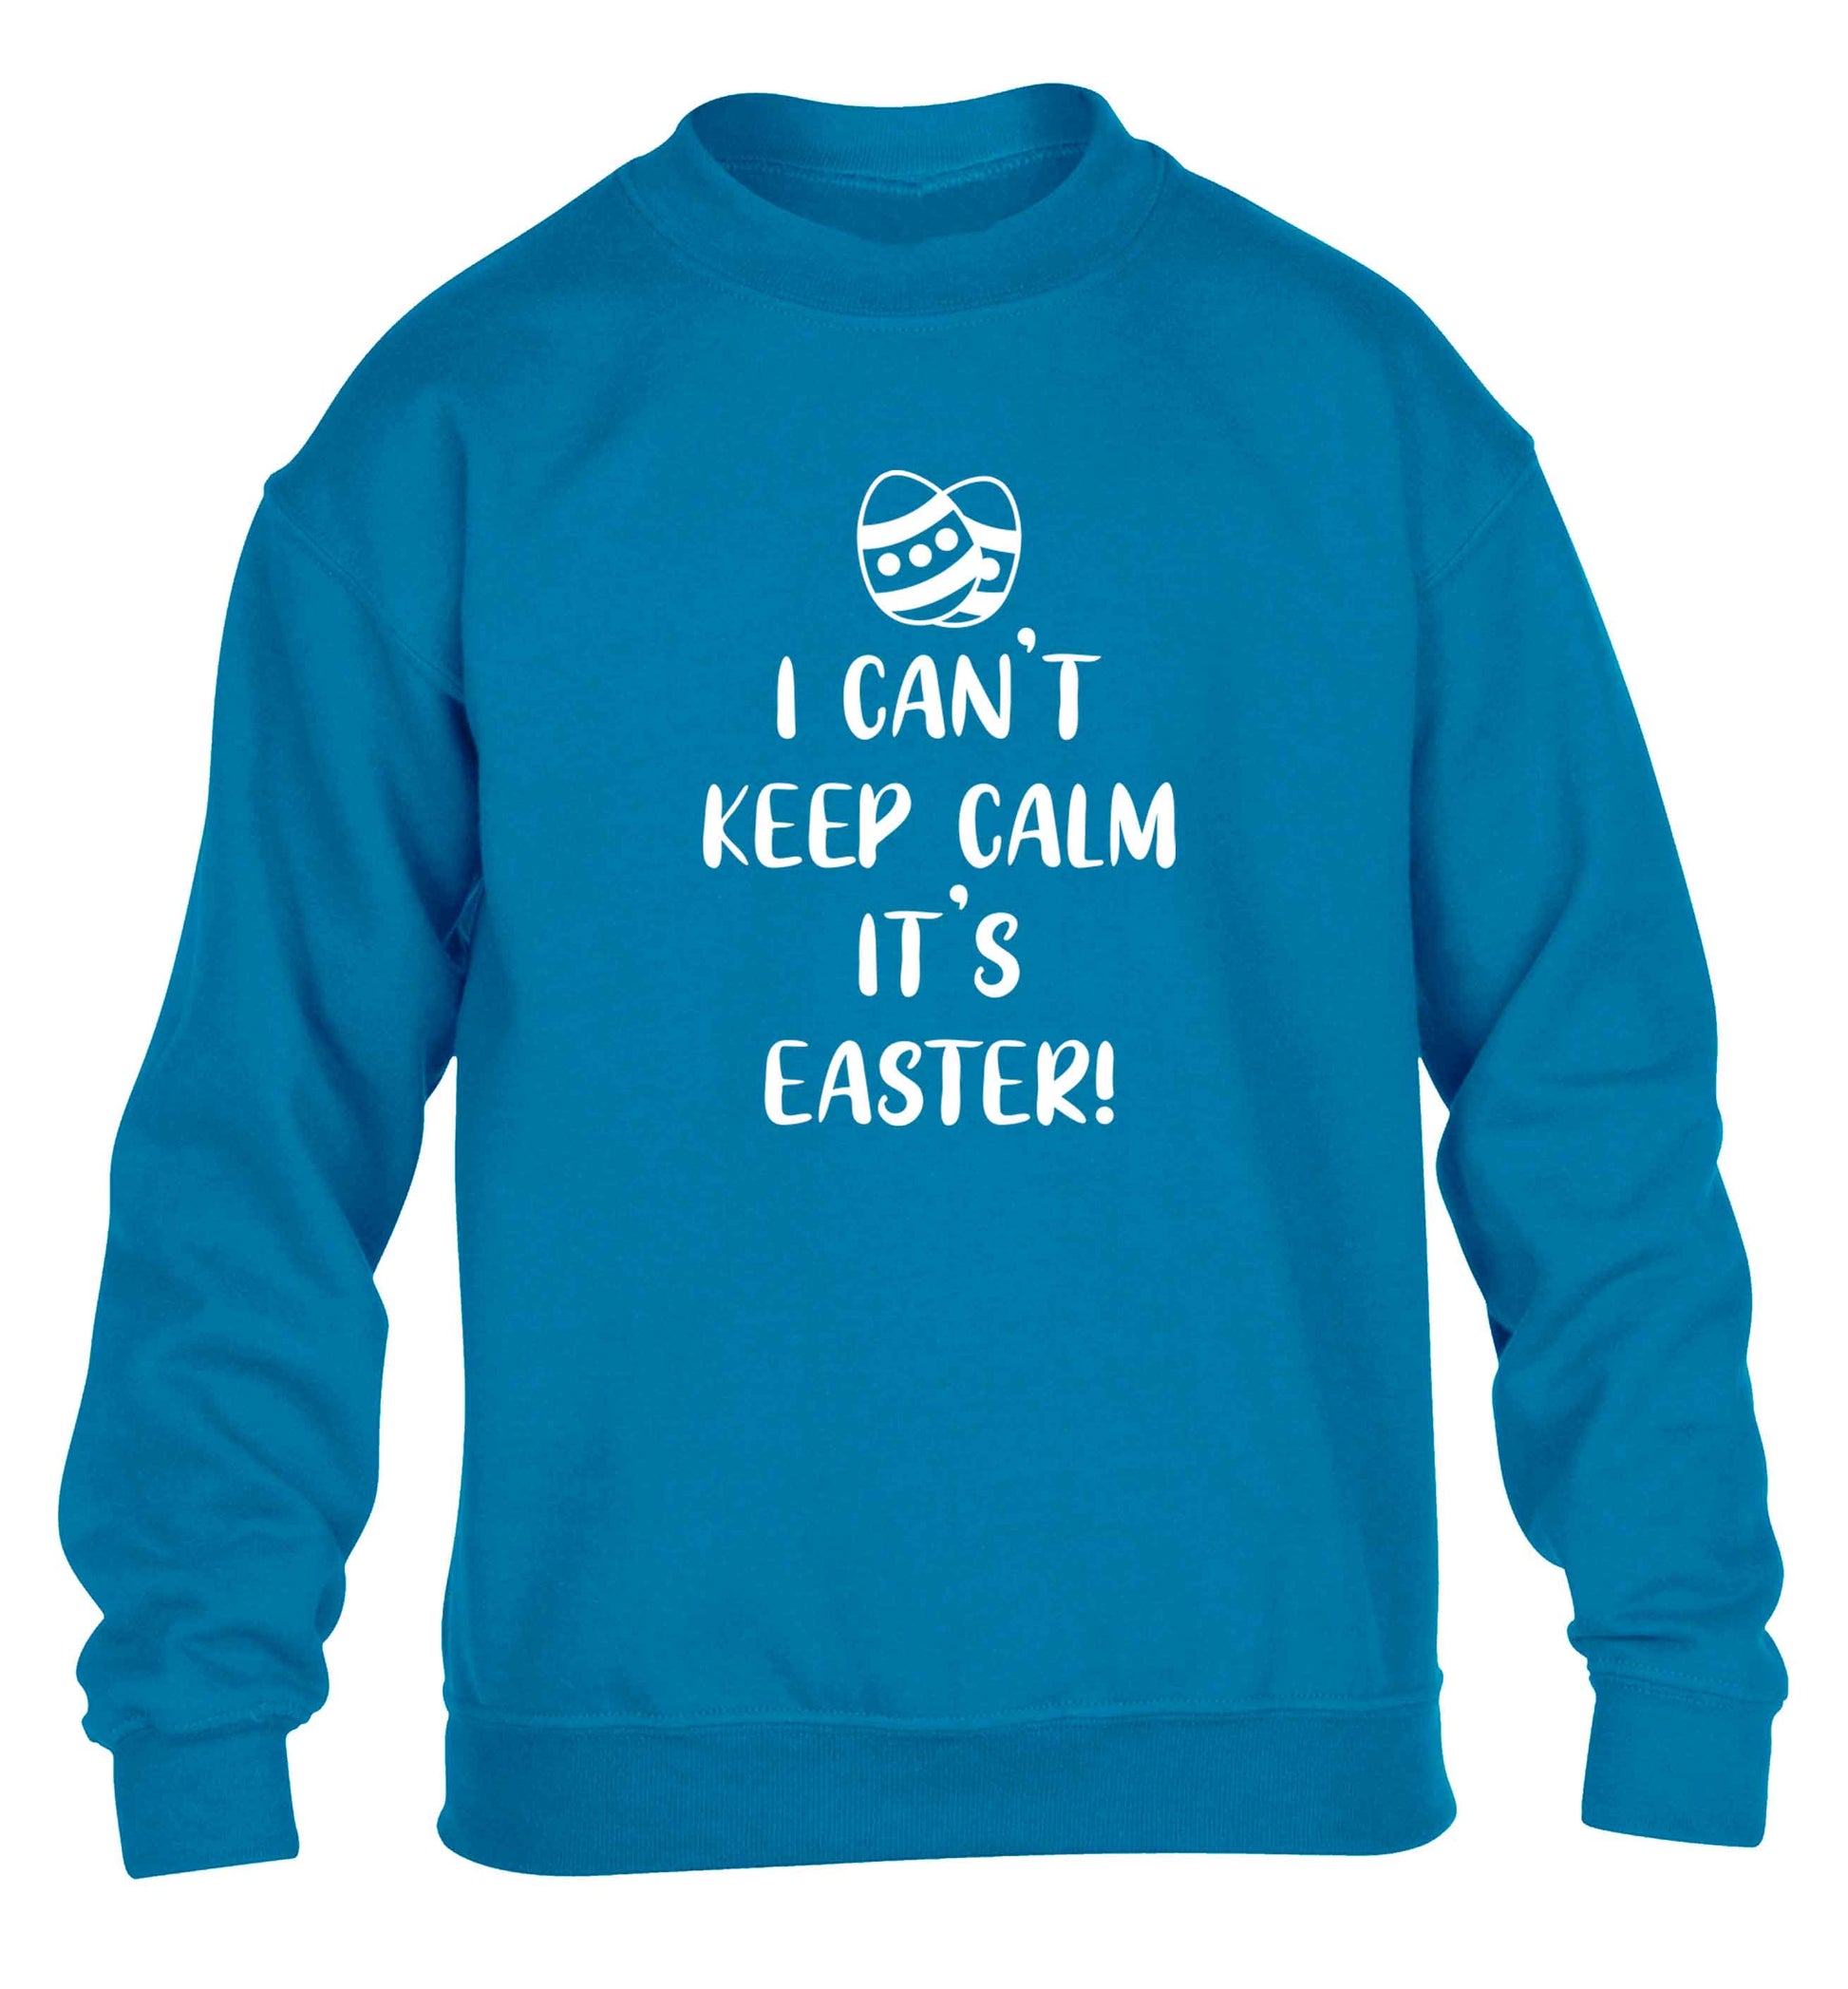 I can't keep calm it's Easter children's blue sweater 12-13 Years